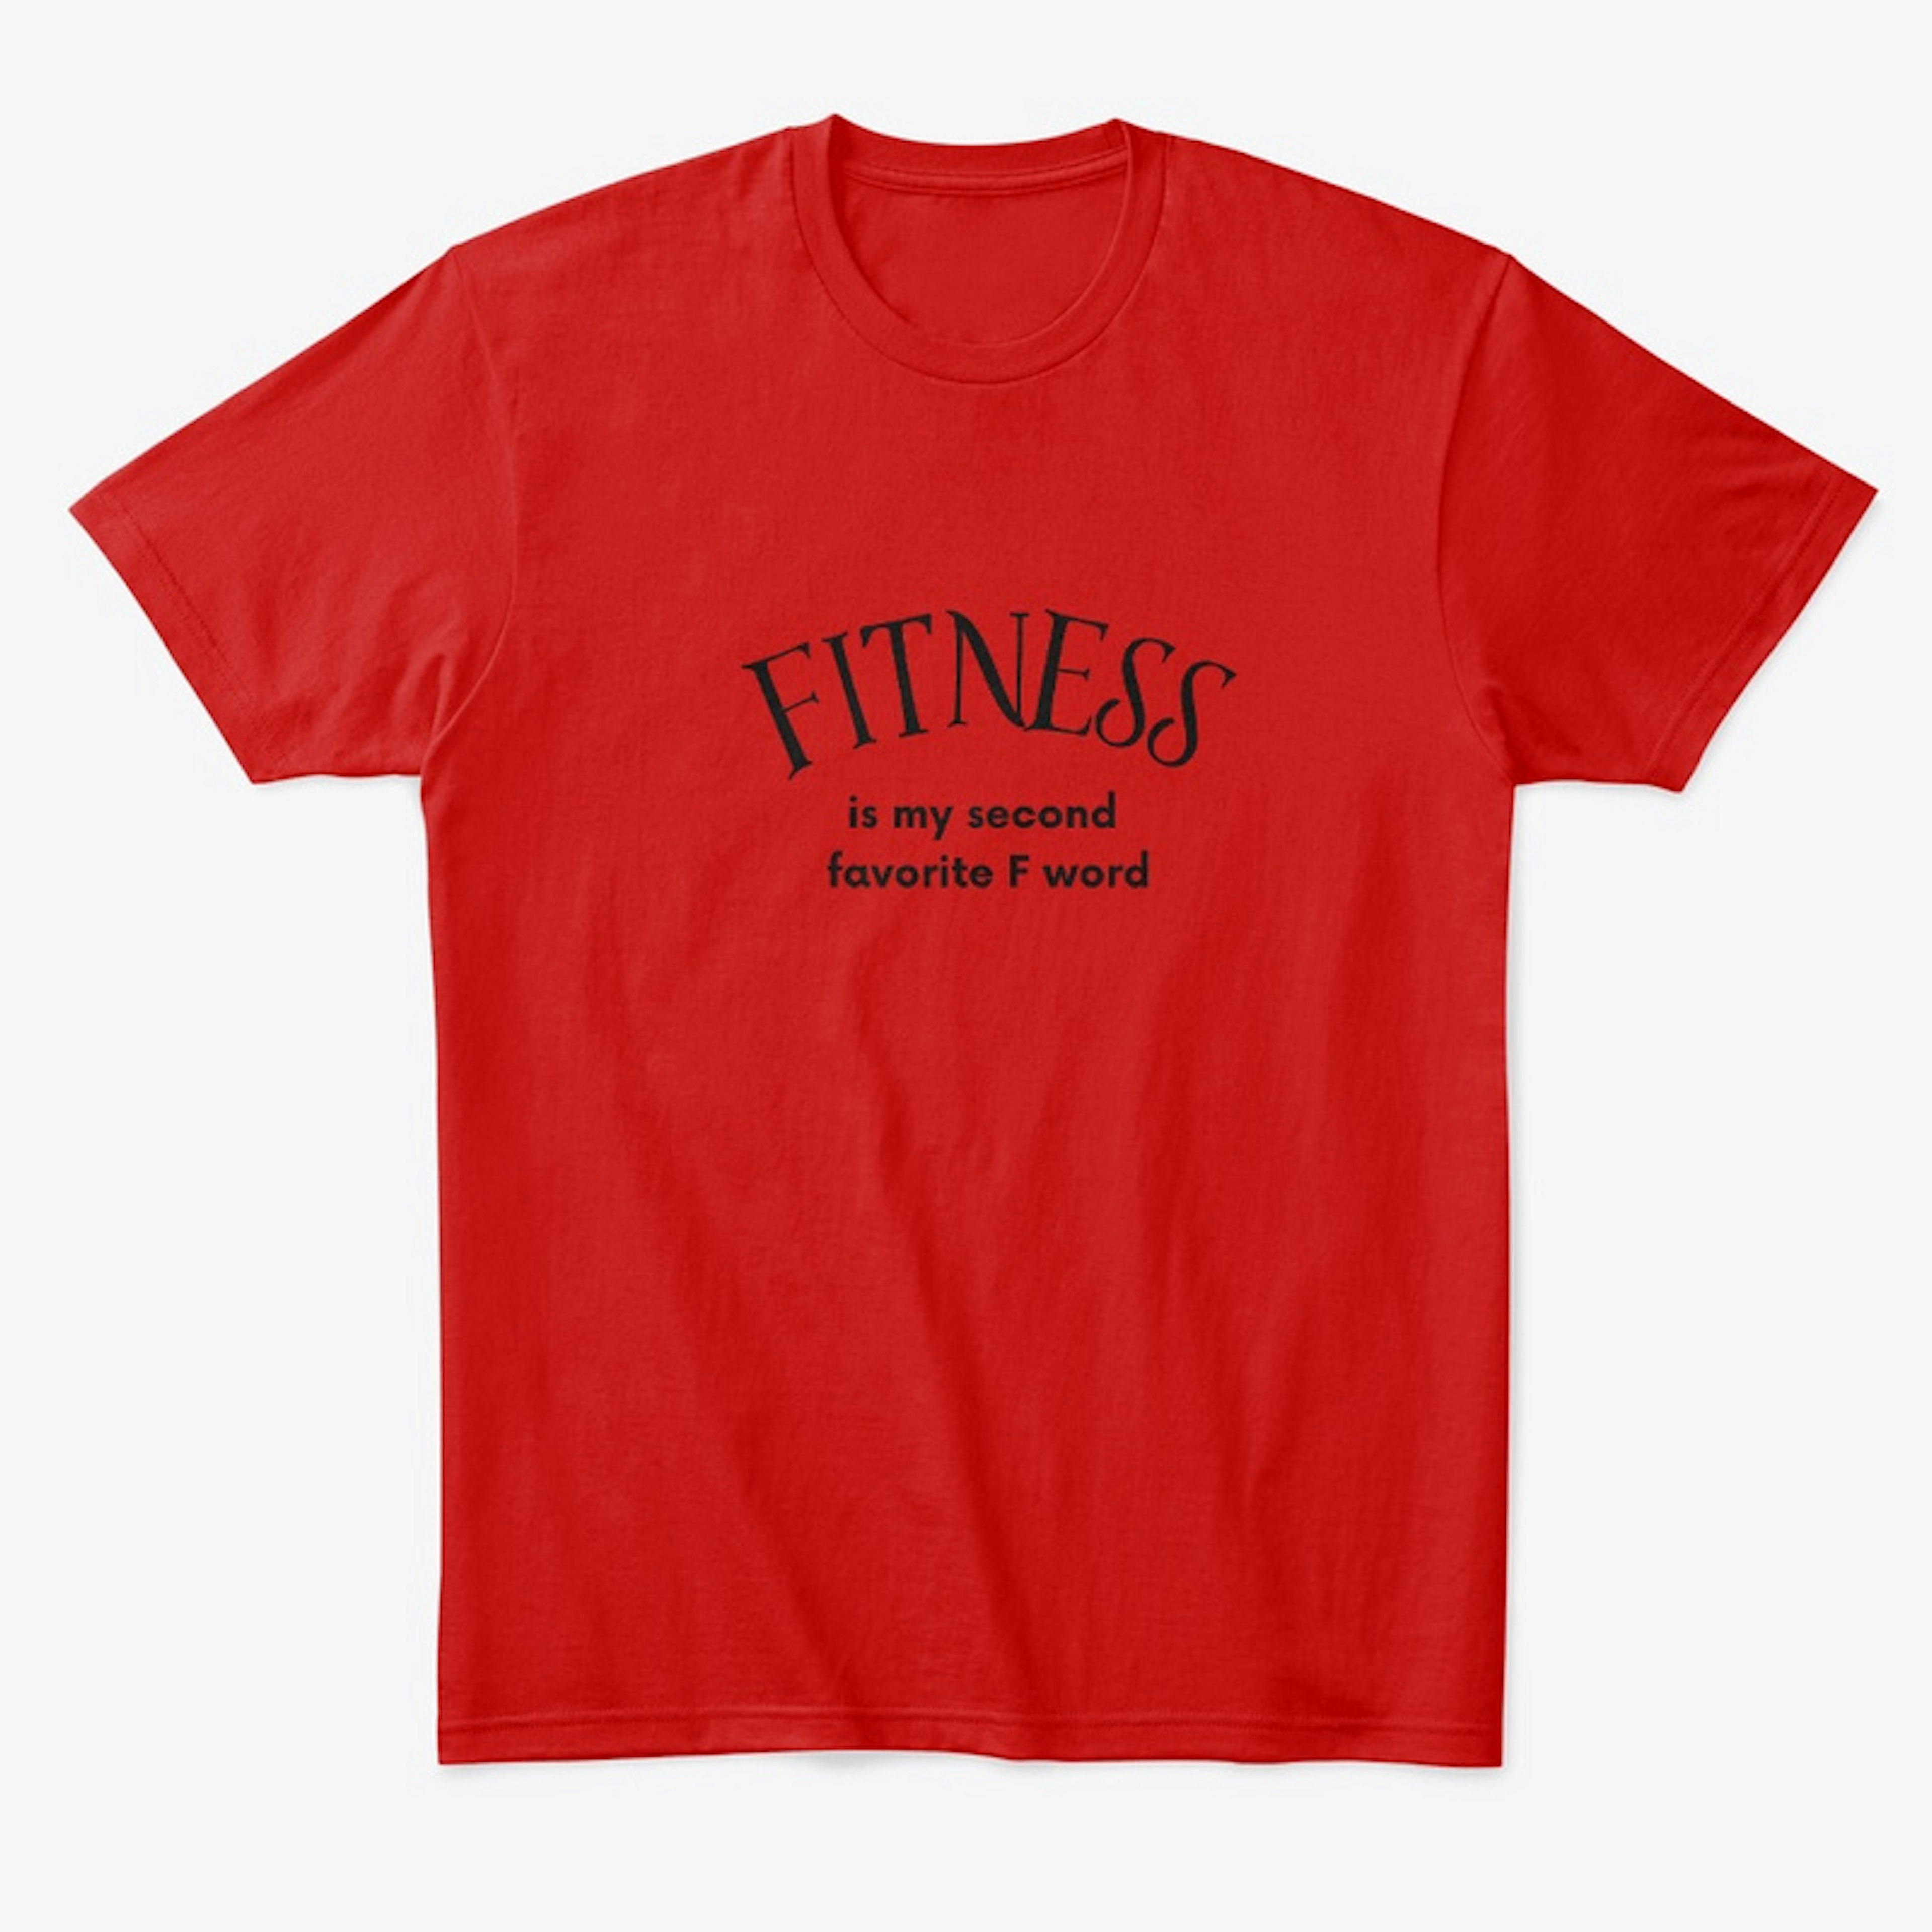 Fitness - is my second favorite F word